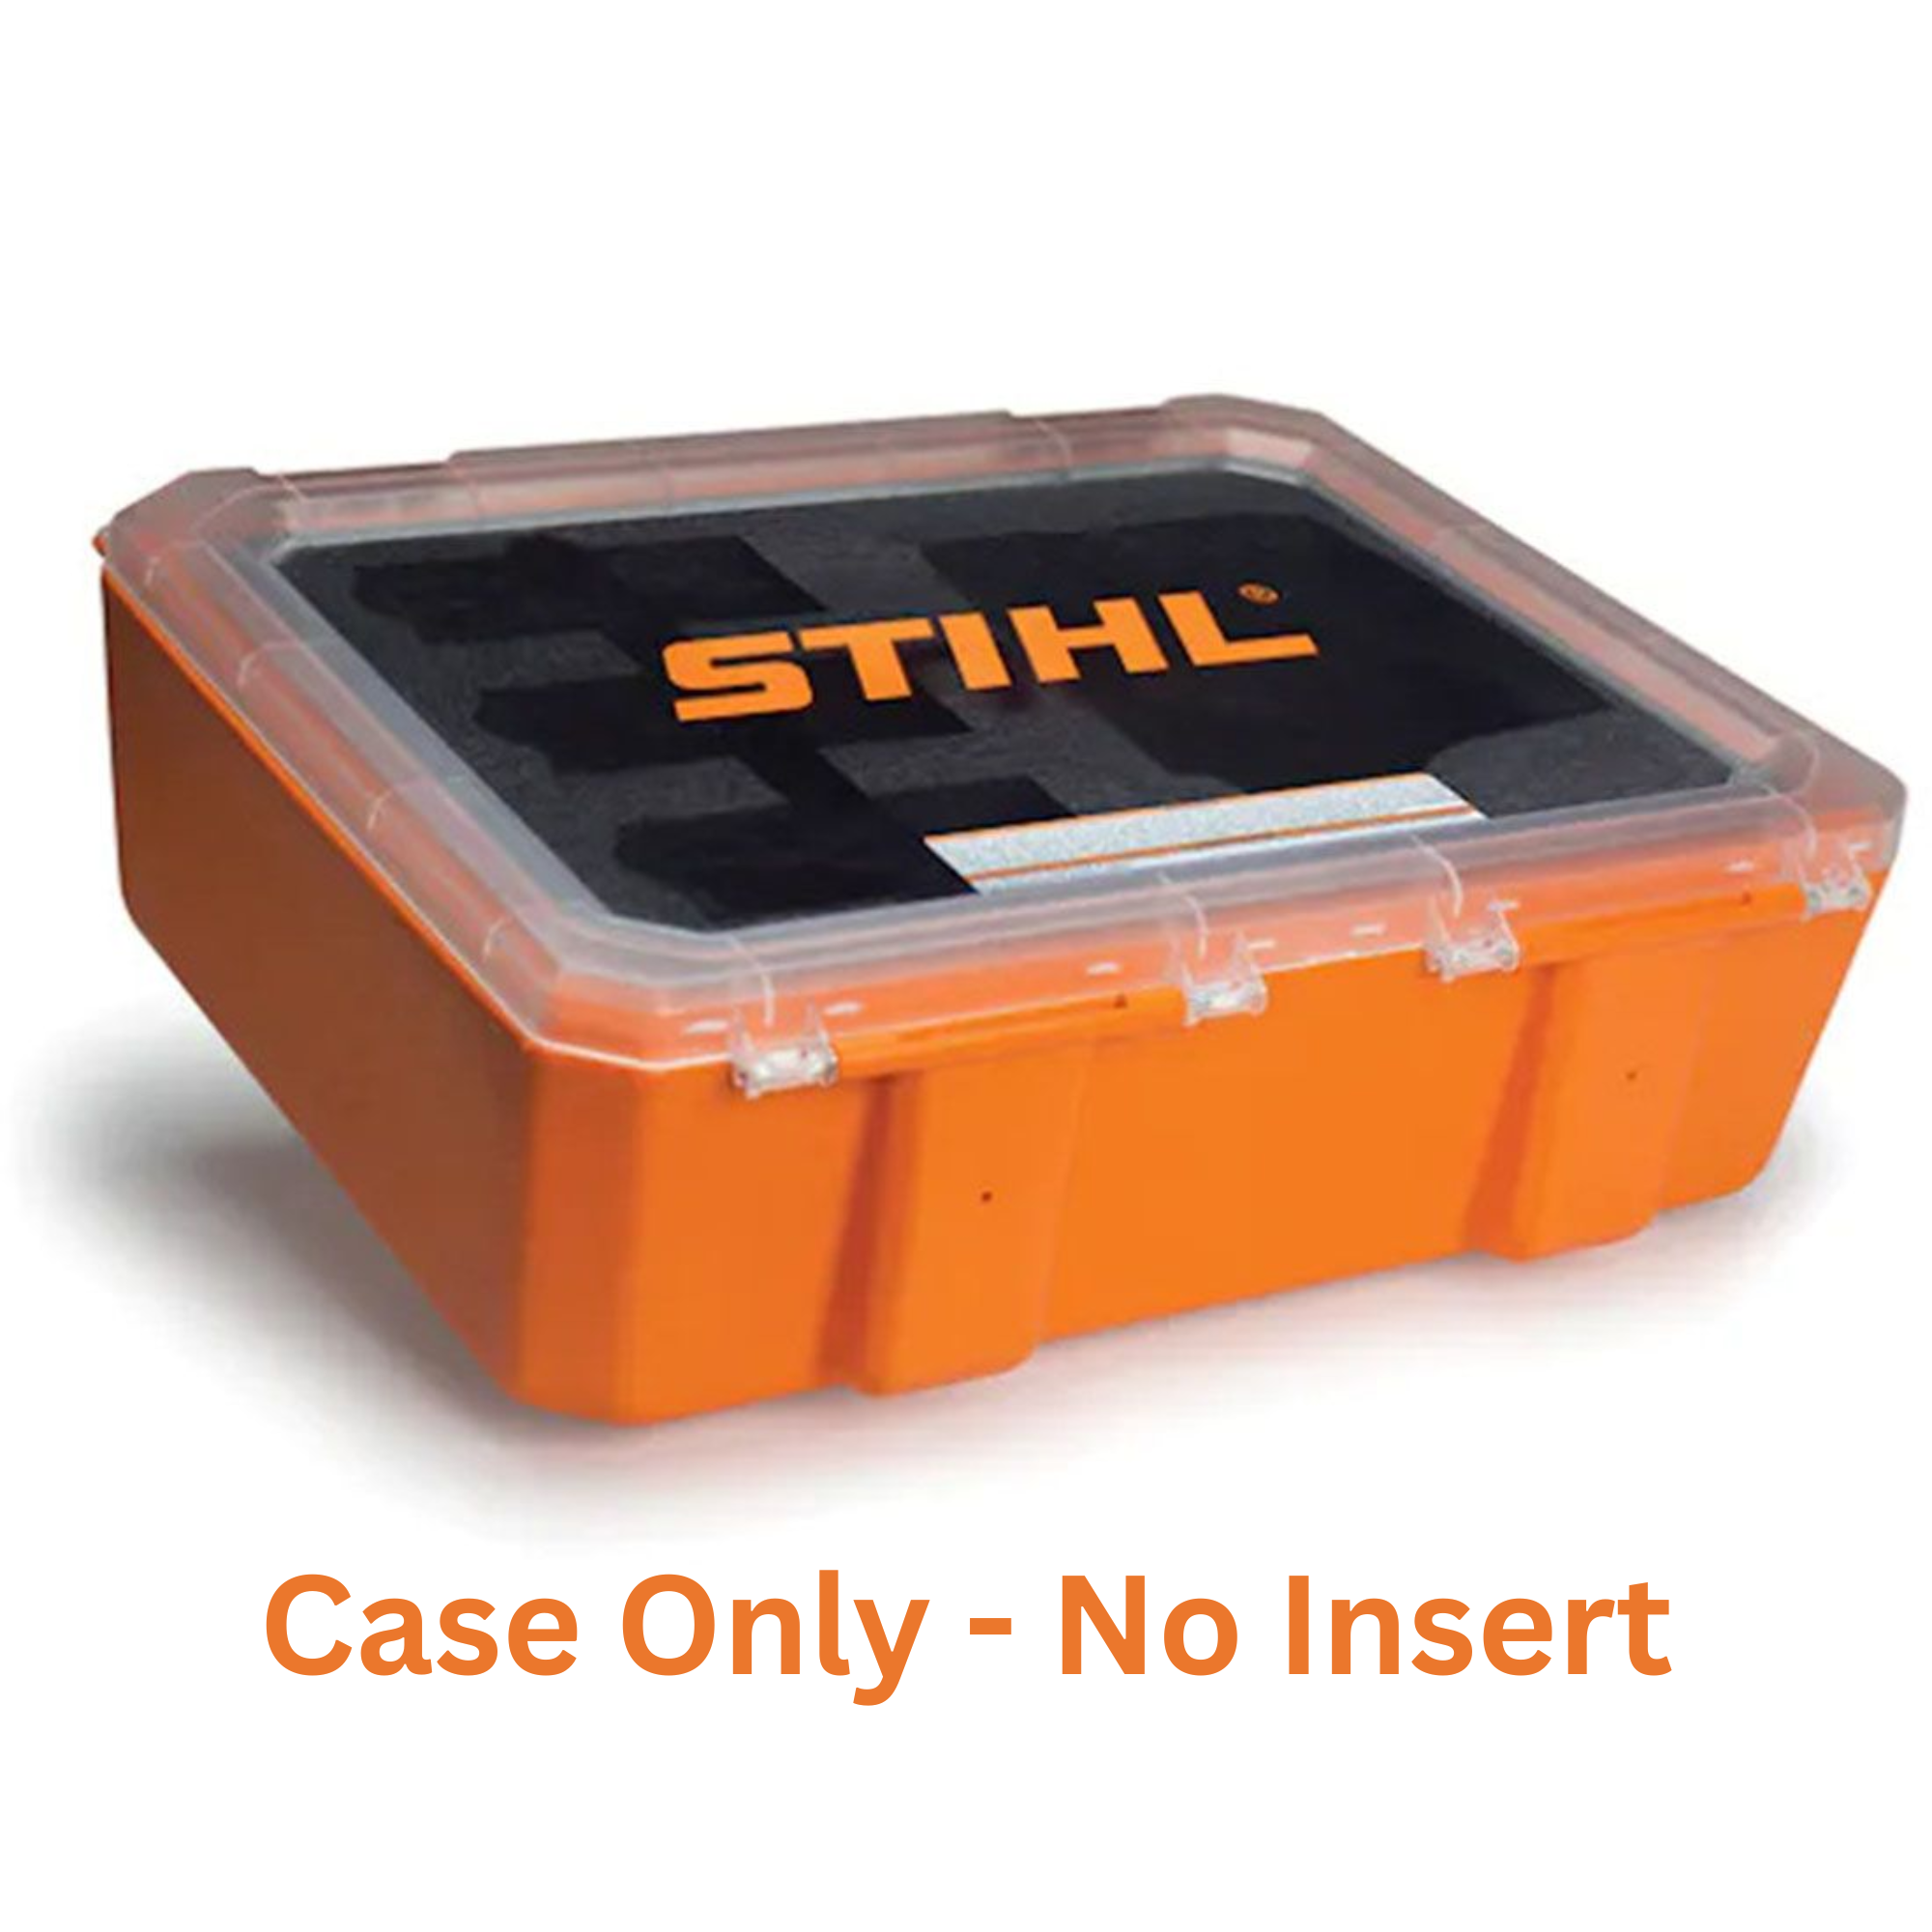 Stihl Battery Carrying Case (No Inserts - Sold Separate)  | 7010 881 5602 | Main Street Mower |Winter Garden | Clermont | Ocala 